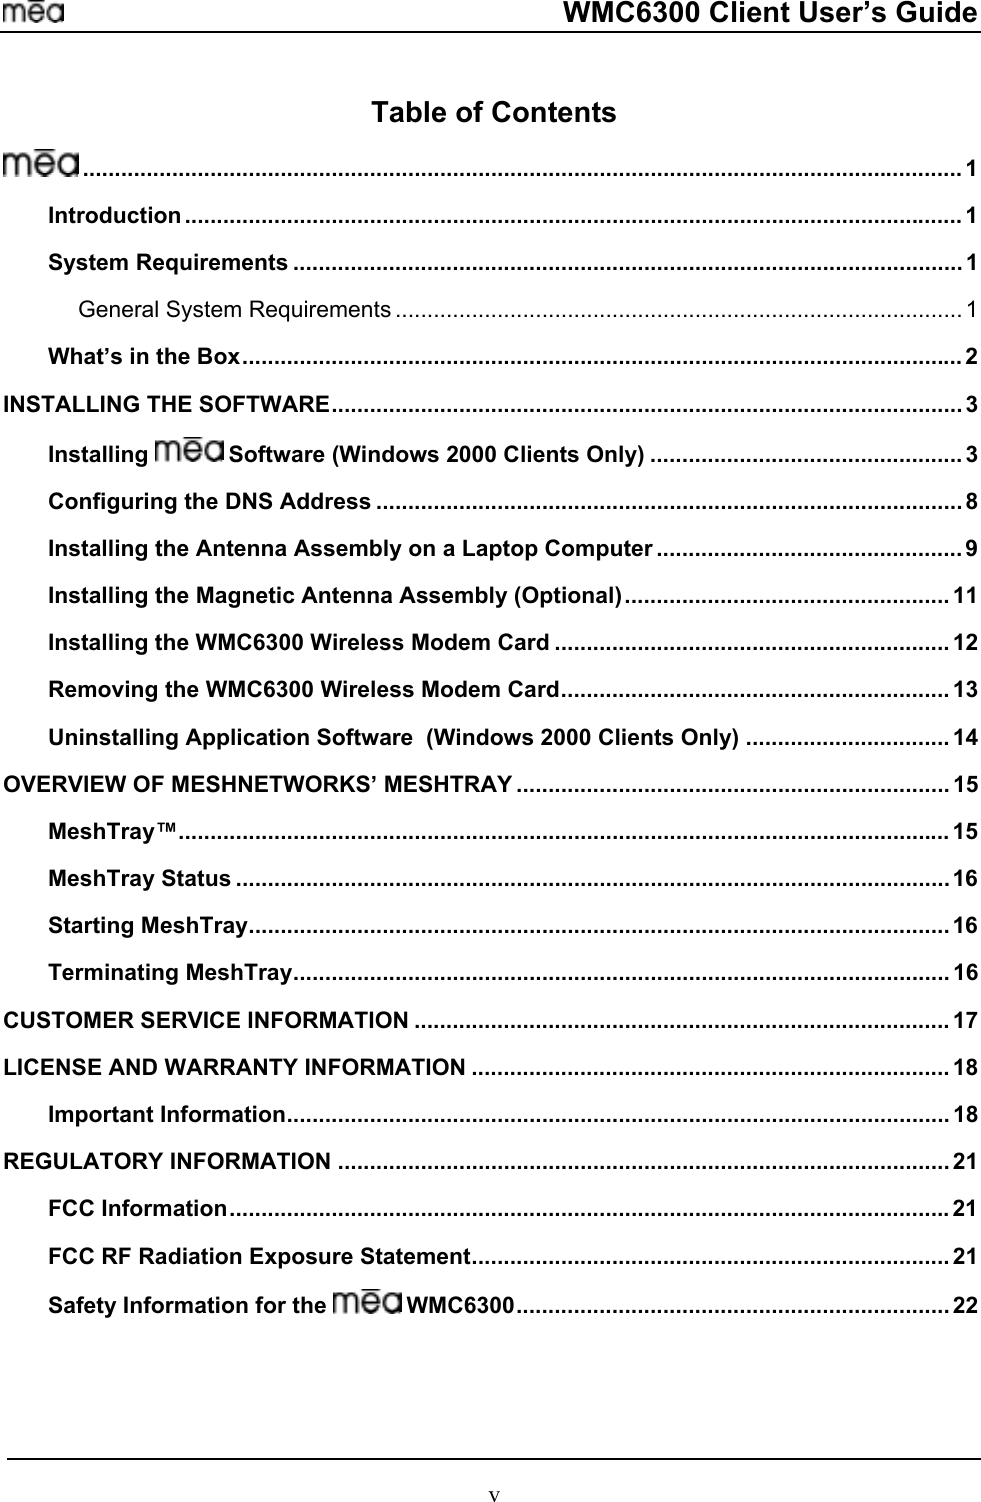     WMC6300 Client User’s Guide Table of Contents  .......................................................................................................................................... 1 Introduction .......................................................................................................................... 1 System Requirements ......................................................................................................... 1 General System Requirements ......................................................................................... 1 What’s in the Box................................................................................................................. 2 INSTALLING THE SOFTWARE...................................................................................................3 Installing   Software (Windows 2000 Clients Only) ................................................. 3 Configuring the DNS Address ............................................................................................8 Installing the Antenna Assembly on a Laptop Computer ................................................ 9 Installing the Magnetic Antenna Assembly (Optional)................................................... 11 Installing the WMC6300 Wireless Modem Card .............................................................. 12 Removing the WMC6300 Wireless Modem Card............................................................. 13 Uninstalling Application Software  (Windows 2000 Clients Only) ................................ 14 OVERVIEW OF MESHNETWORKS’ MESHTRAY .................................................................... 15 MeshTray™......................................................................................................................... 15 MeshTray Status ................................................................................................................16 Starting MeshTray..............................................................................................................16 Terminating MeshTray....................................................................................................... 16 CUSTOMER SERVICE INFORMATION .................................................................................... 17 LICENSE AND WARRANTY INFORMATION ........................................................................... 18 Important Information........................................................................................................ 18 REGULATORY INFORMATION ................................................................................................ 21 FCC Information.................................................................................................................21 FCC RF Radiation Exposure Statement........................................................................... 21 Safety Information for the   WMC6300.................................................................... 22   v 